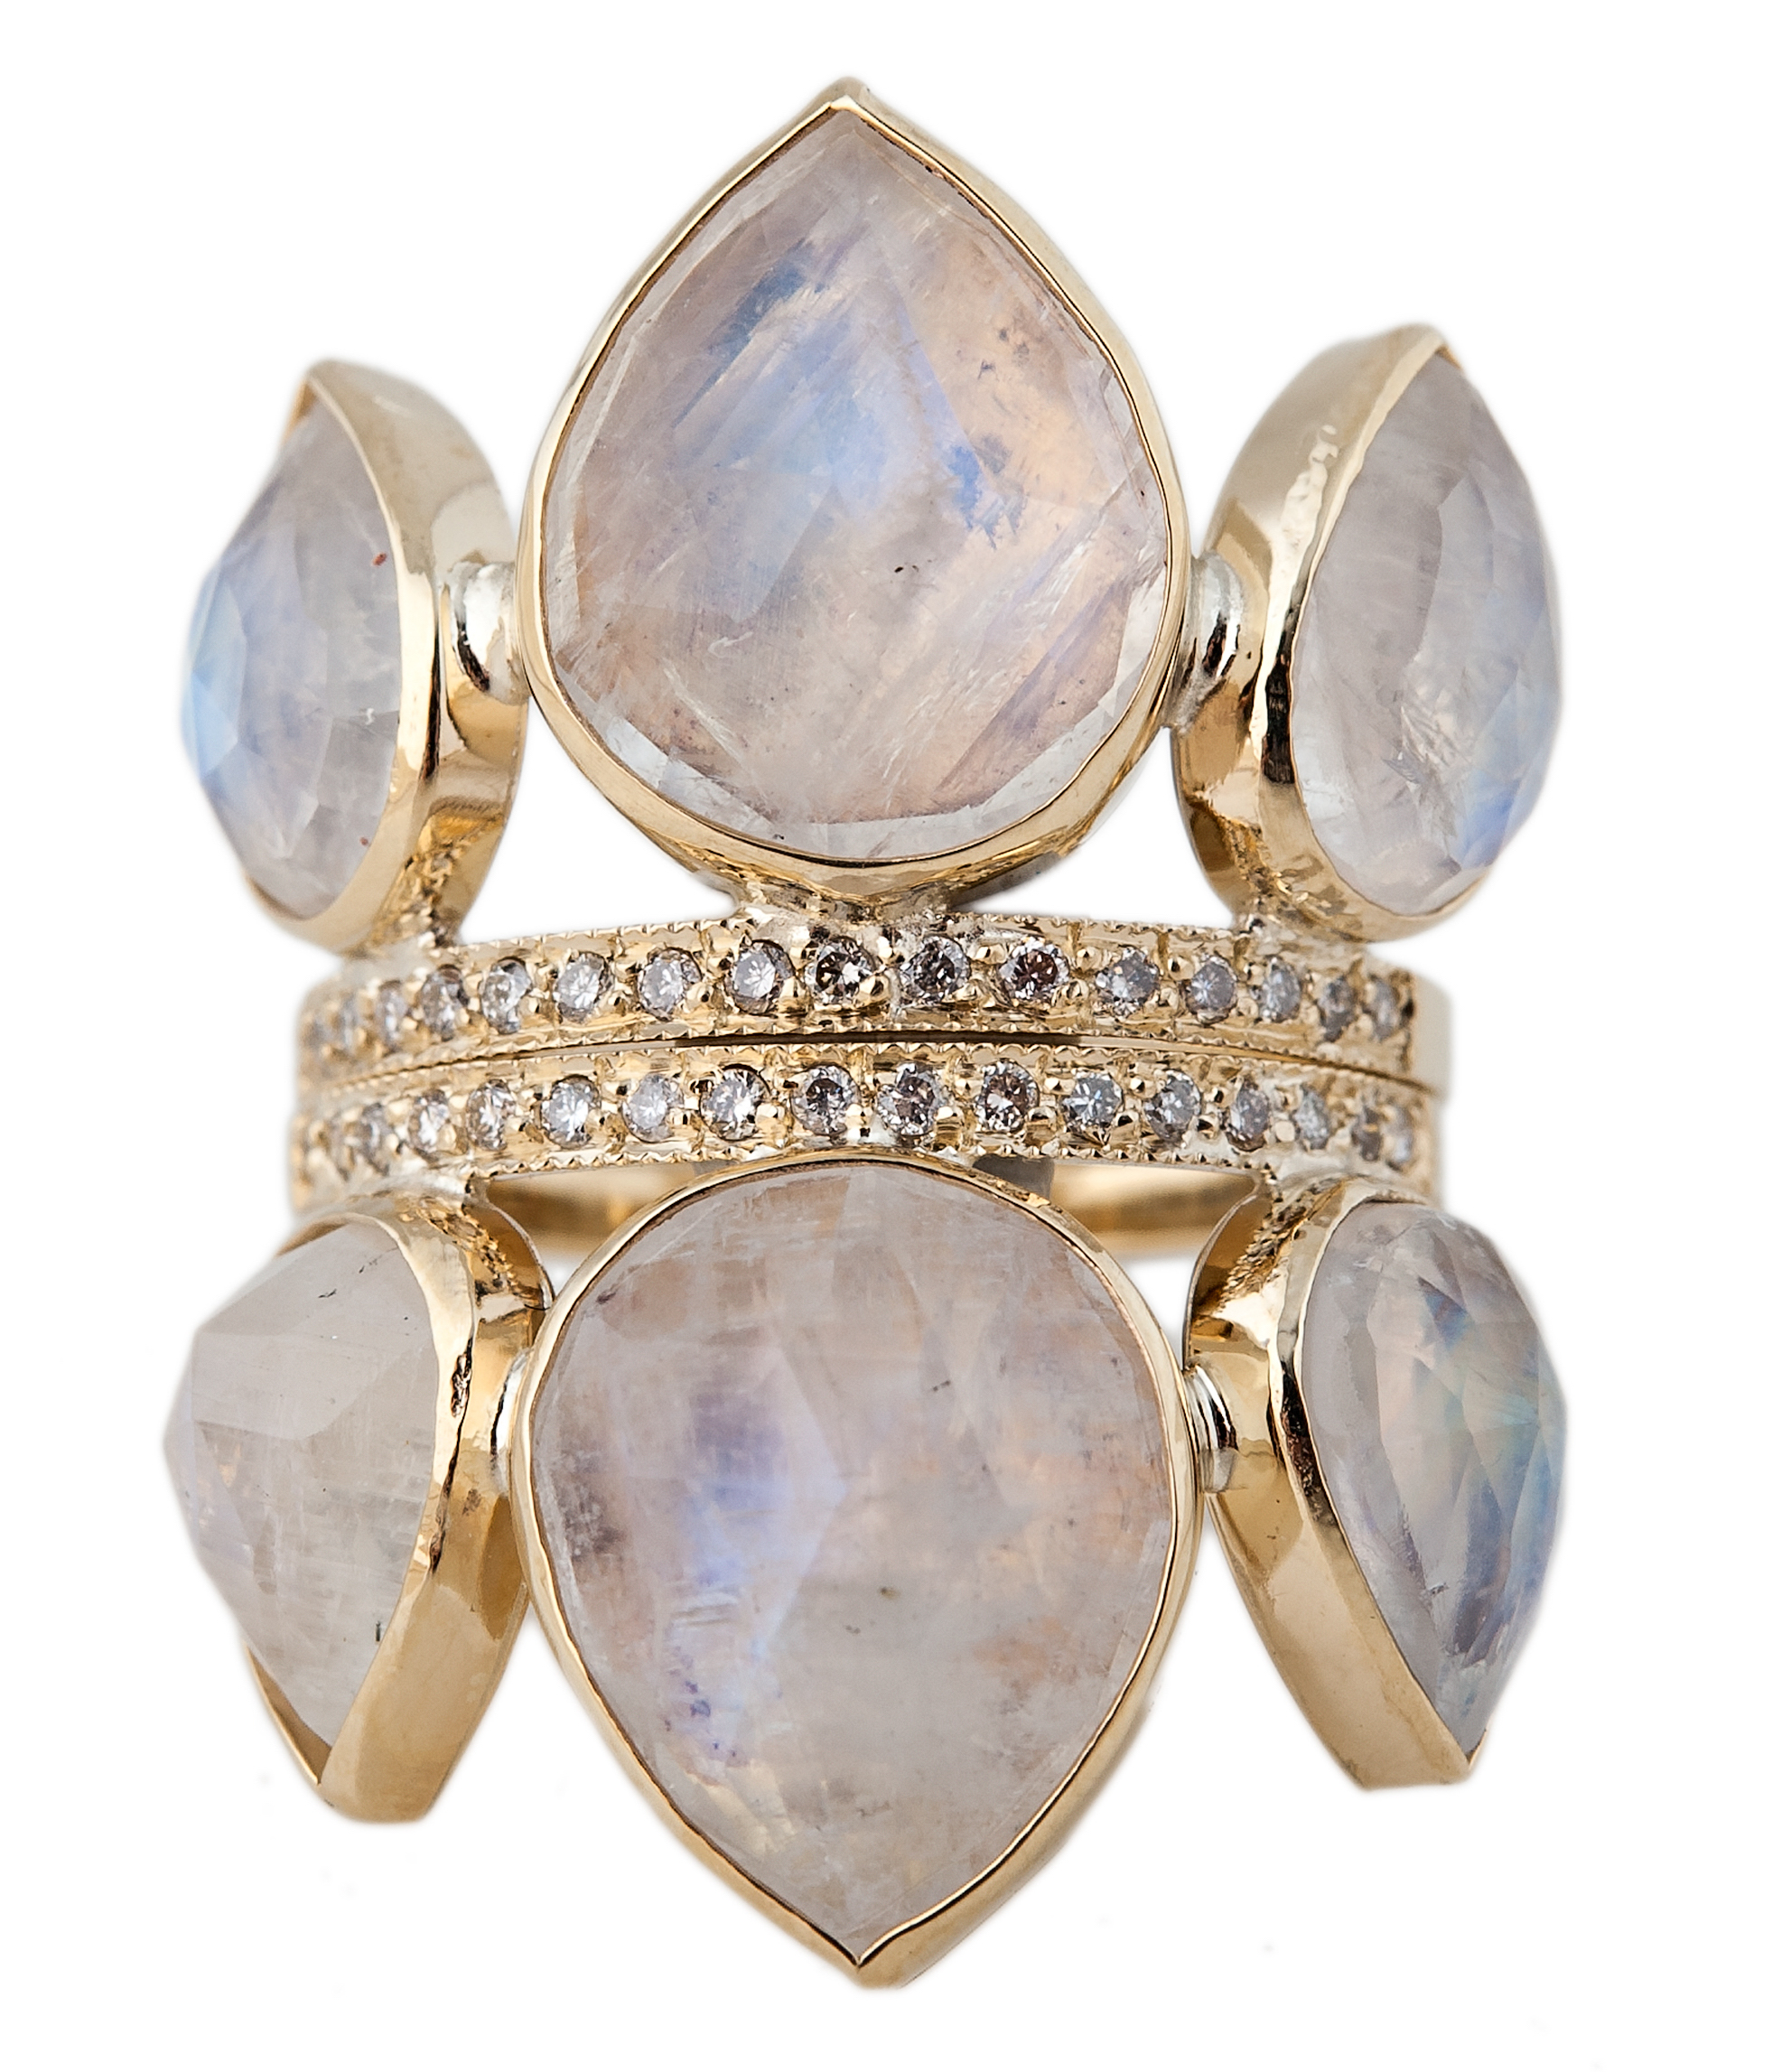 Jacquie Aiche gemstone Petal stack rings | JCK On Your Market